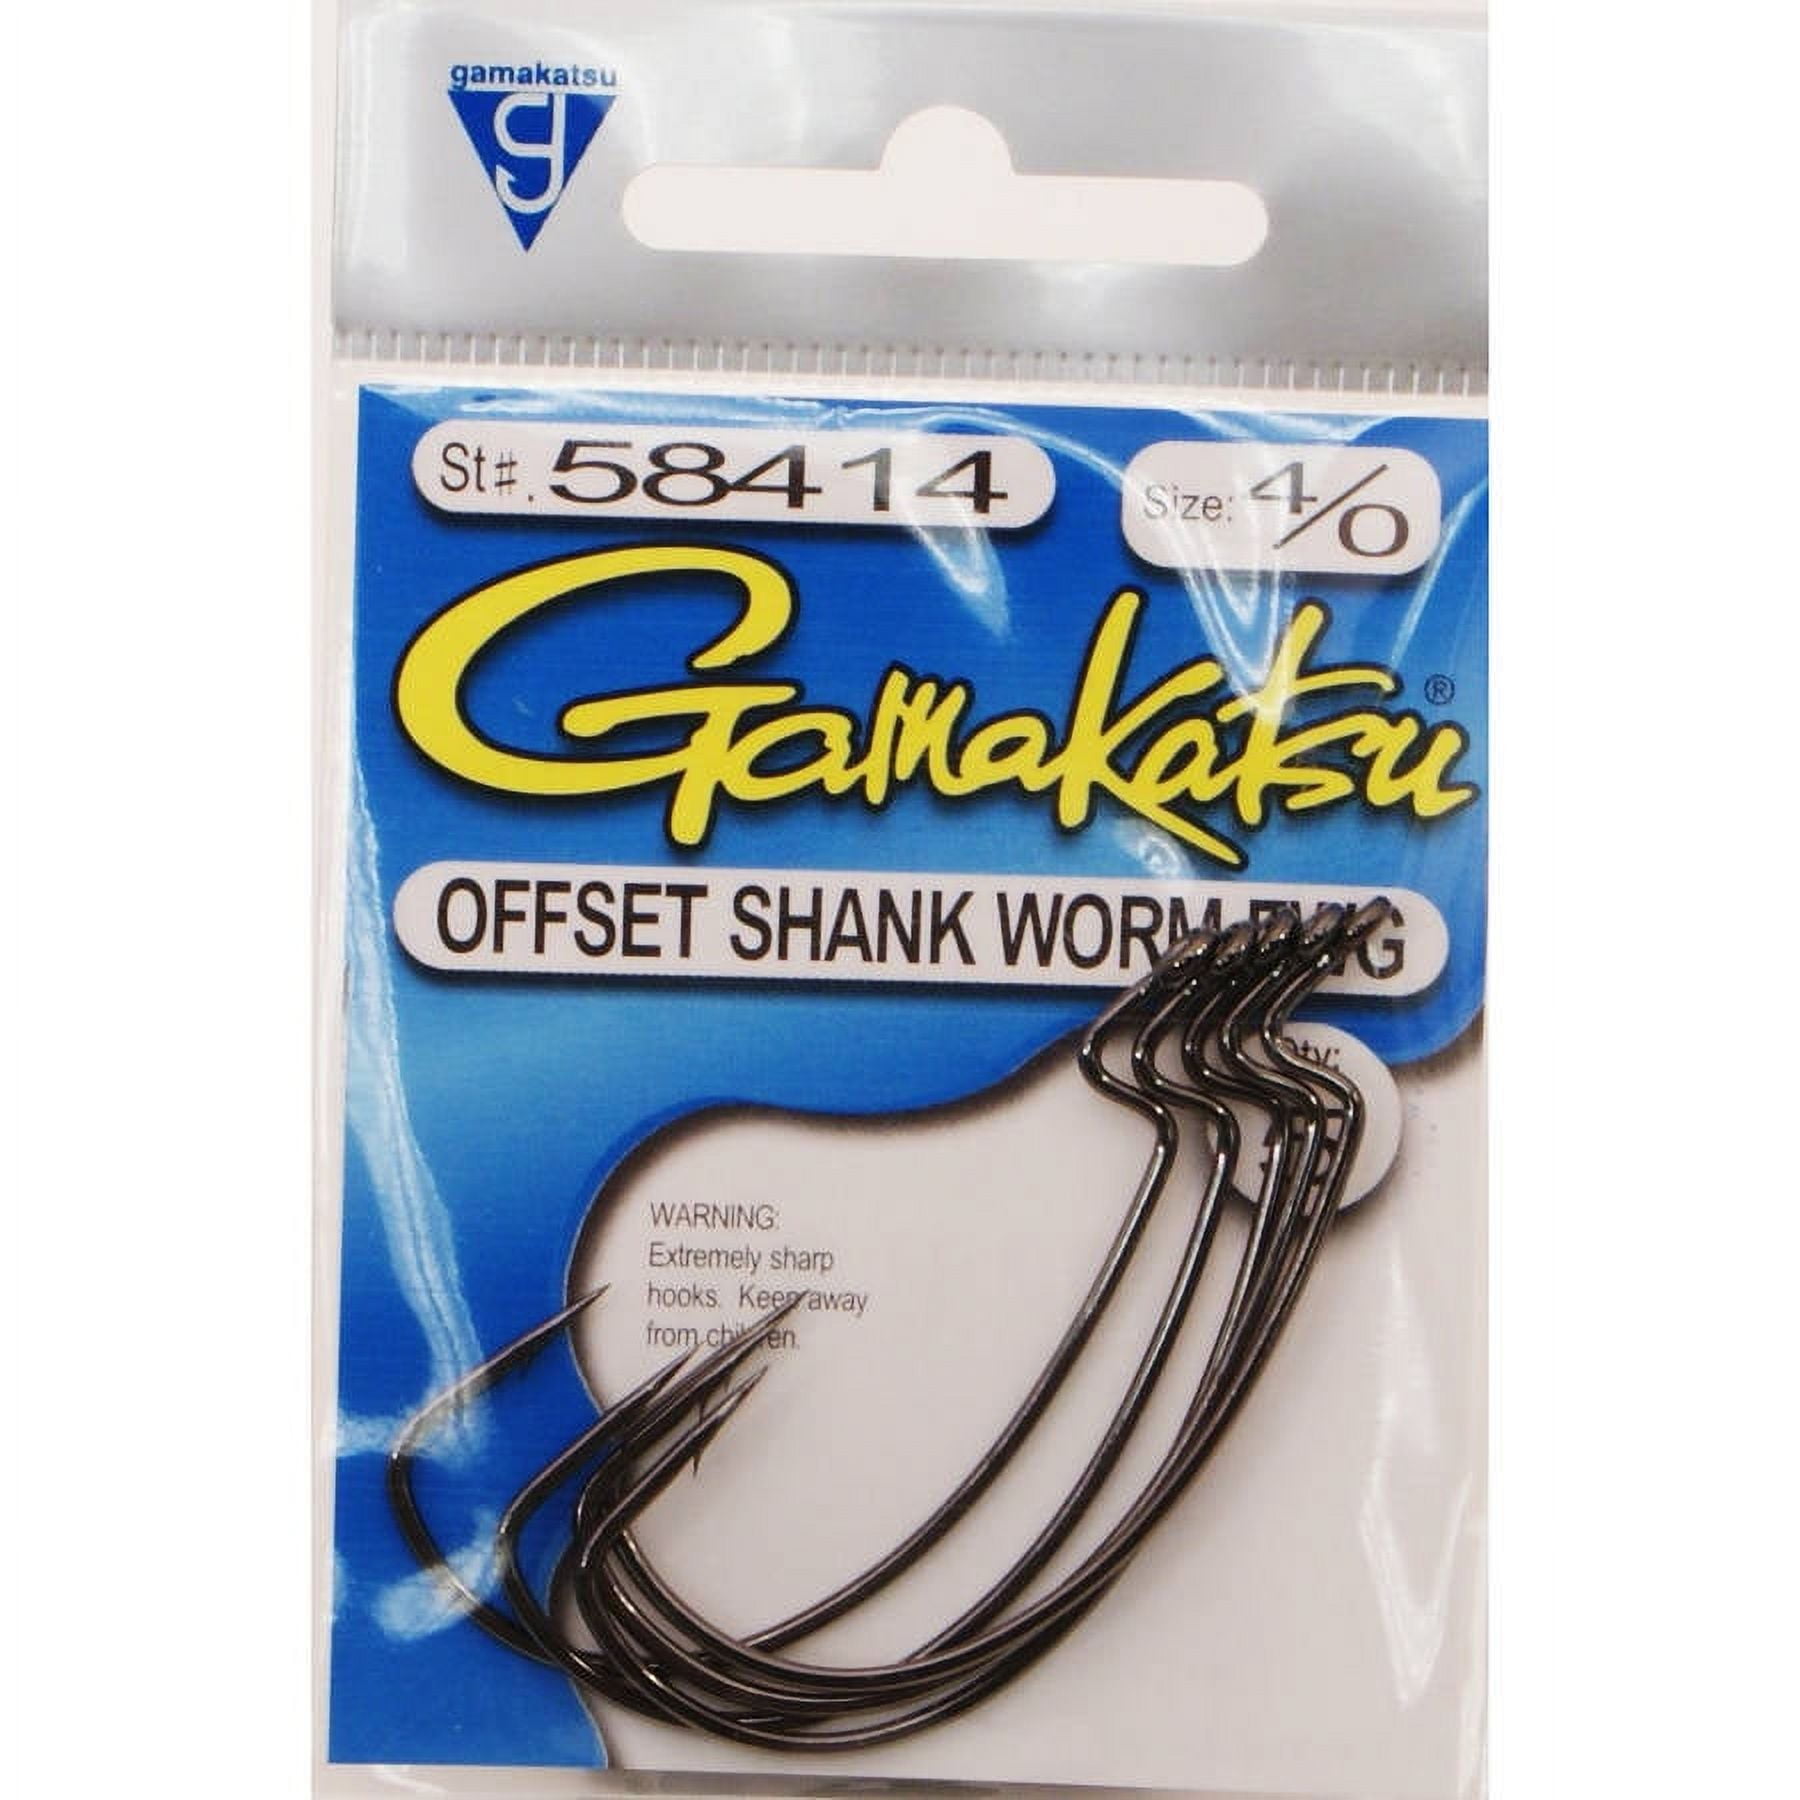 Gamakatsu Worm Offset EWG Hook in High Quality Carbon Steel, Size 4/0, NS  Black, 5-Pack